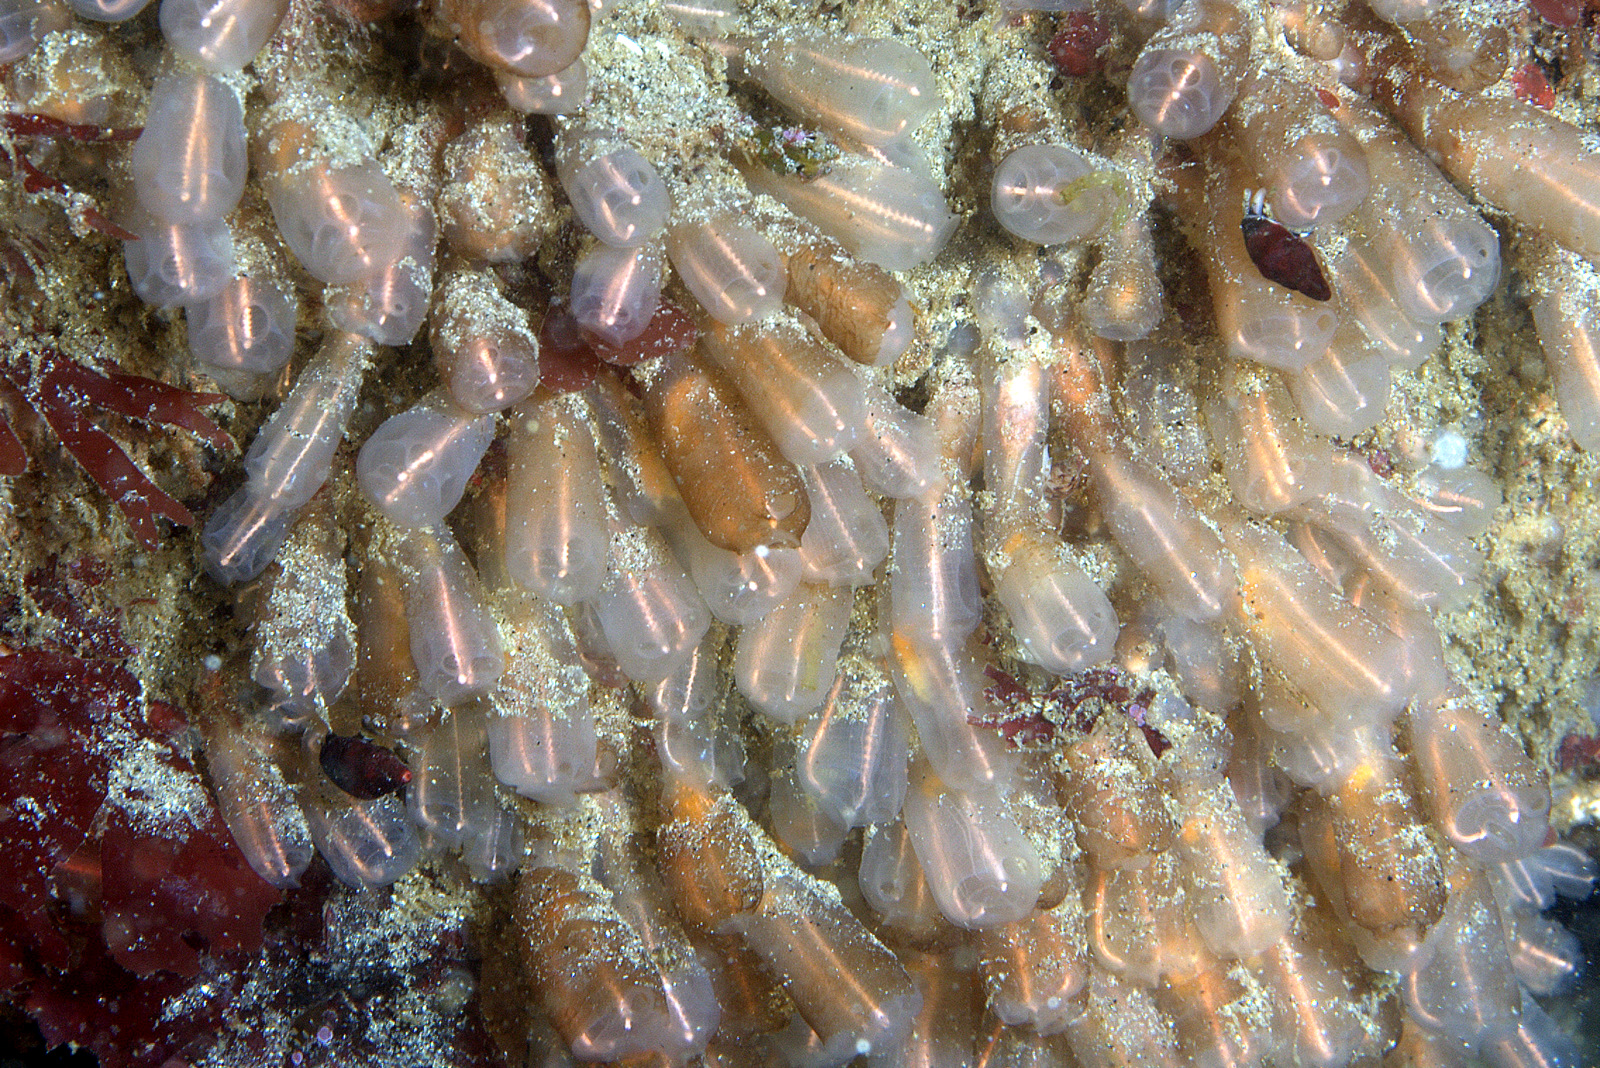 several sea worms on anemonic surface with tiny corals